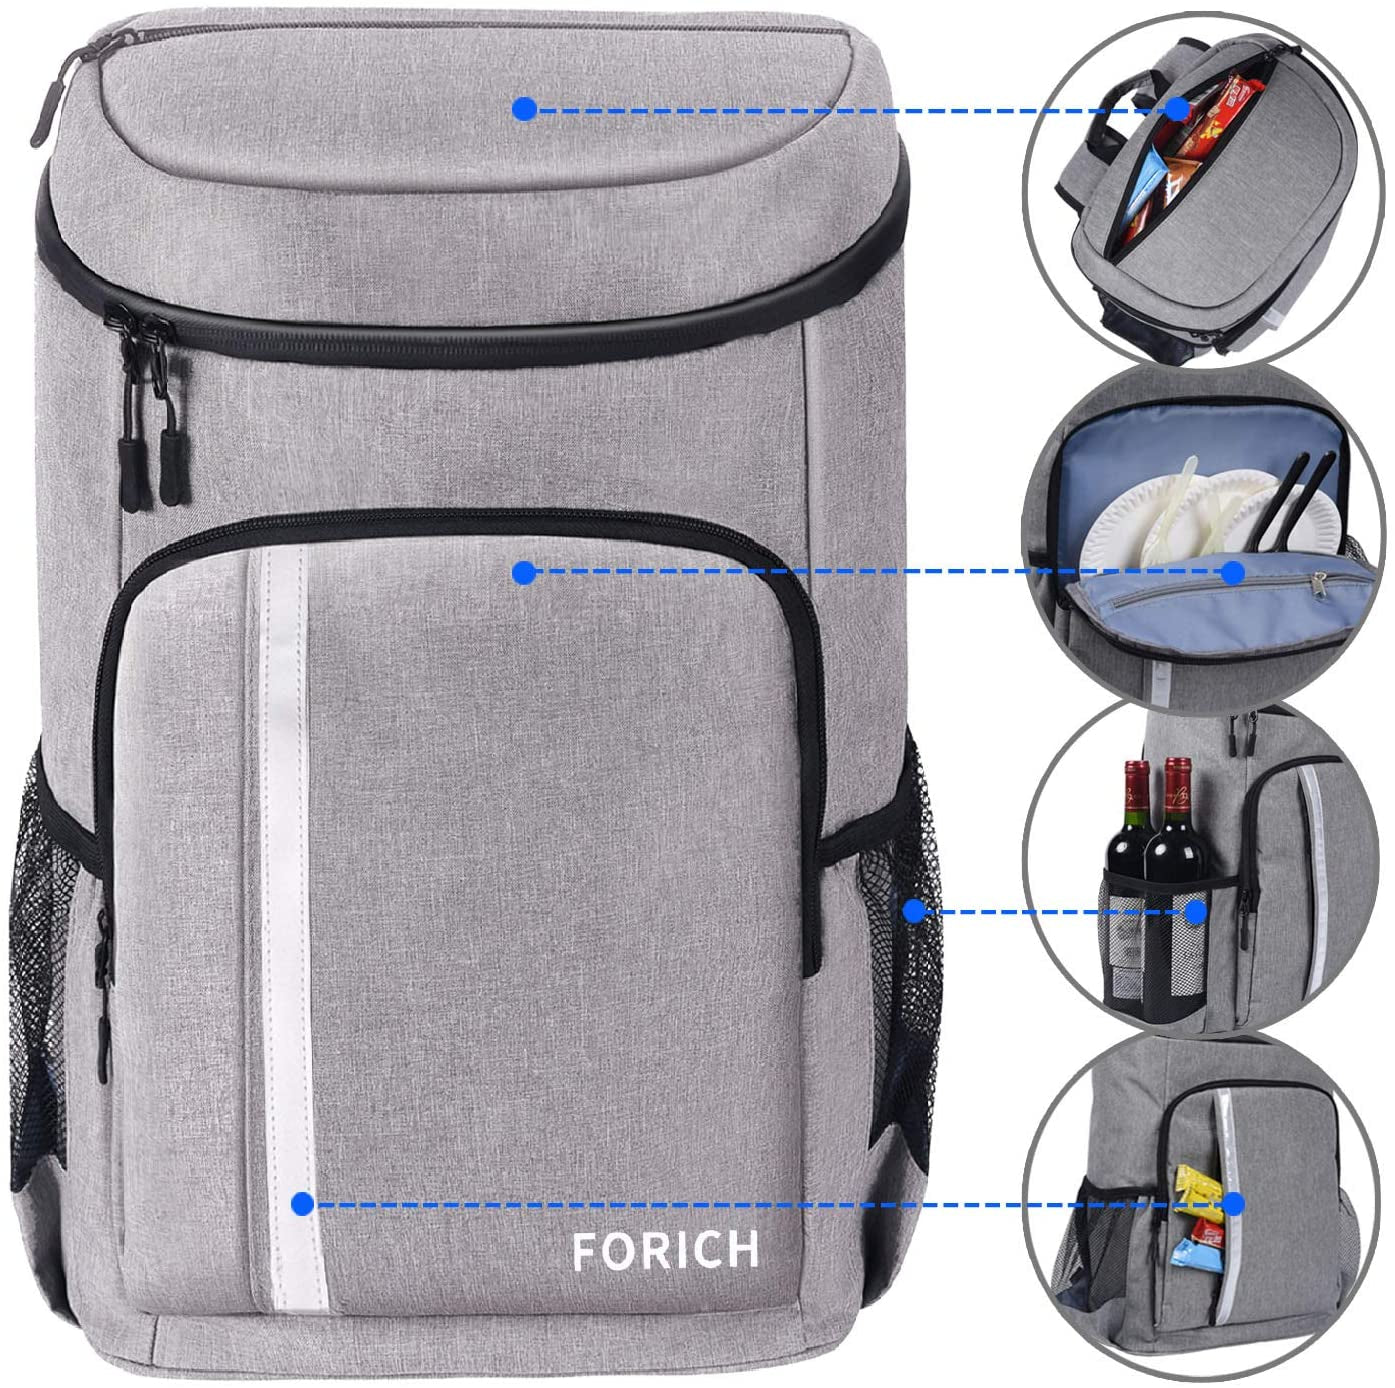 "Waterproof Insulated Backpack Cooler Bag - Perfect for Work, Picnics, and Hiking!"